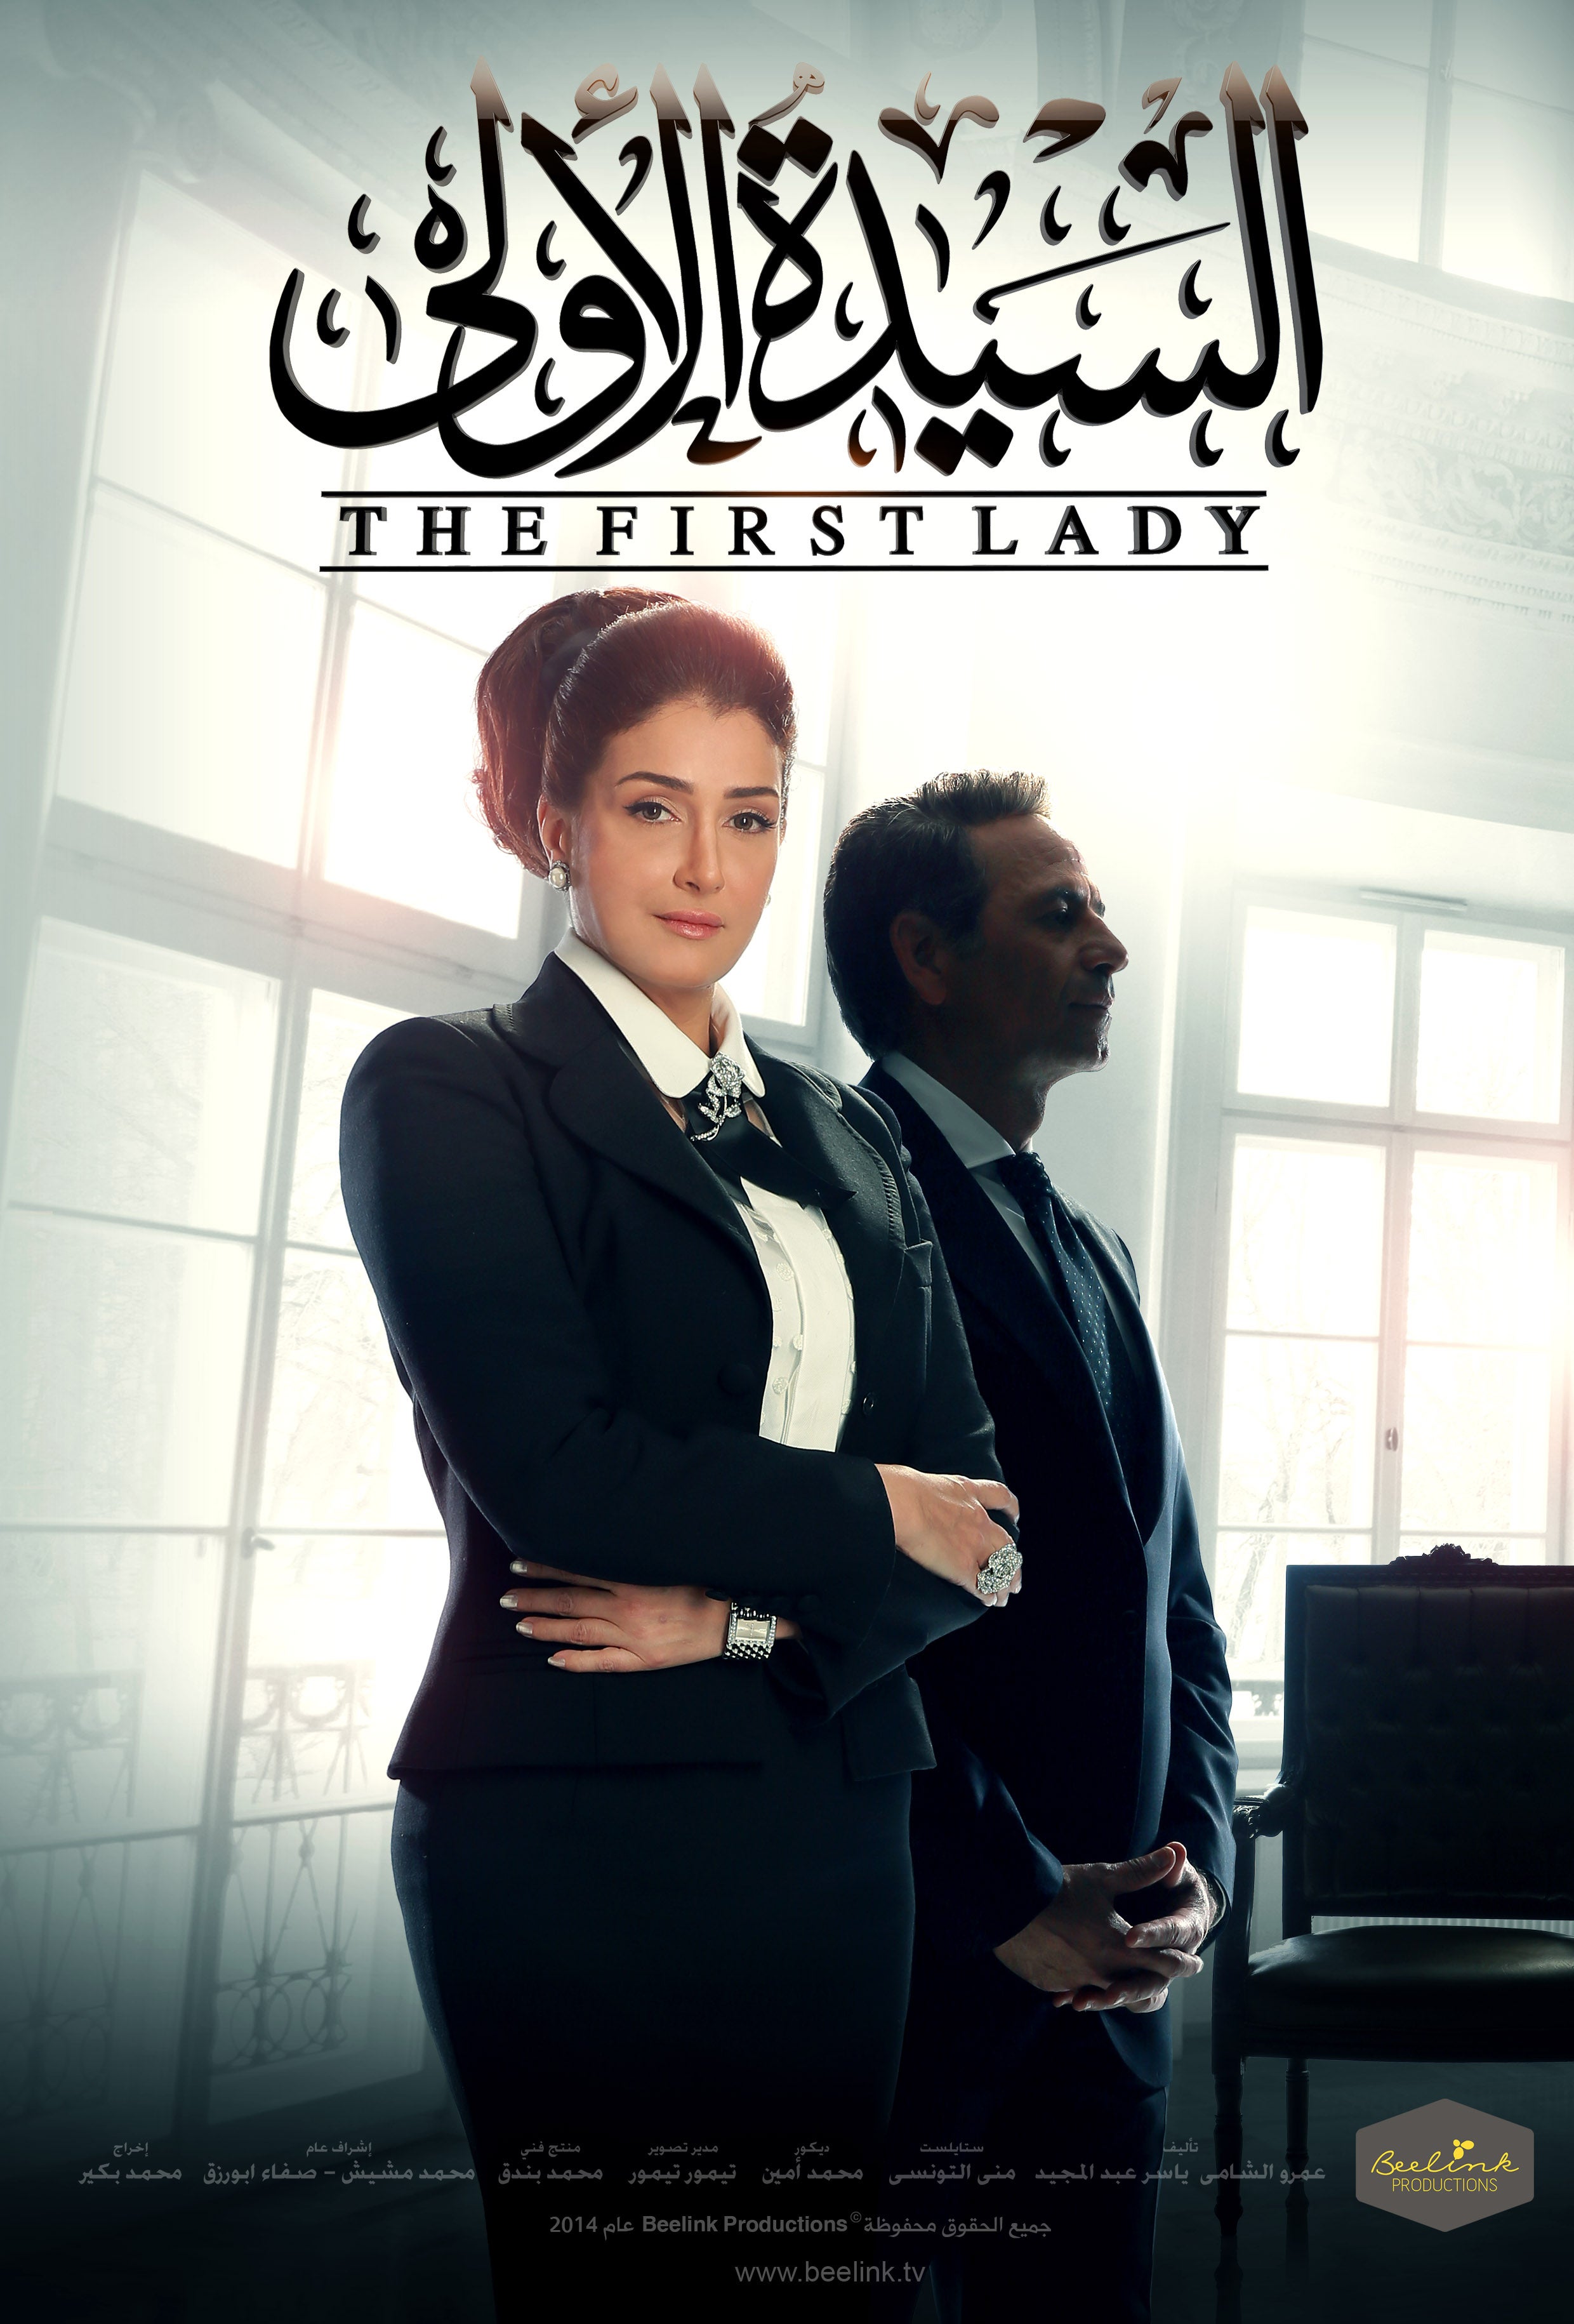 TV ratings for Al Sayeda Al Aoula: First Lady (السيدة الأولى) in Philippines. Beelink Productions TV series